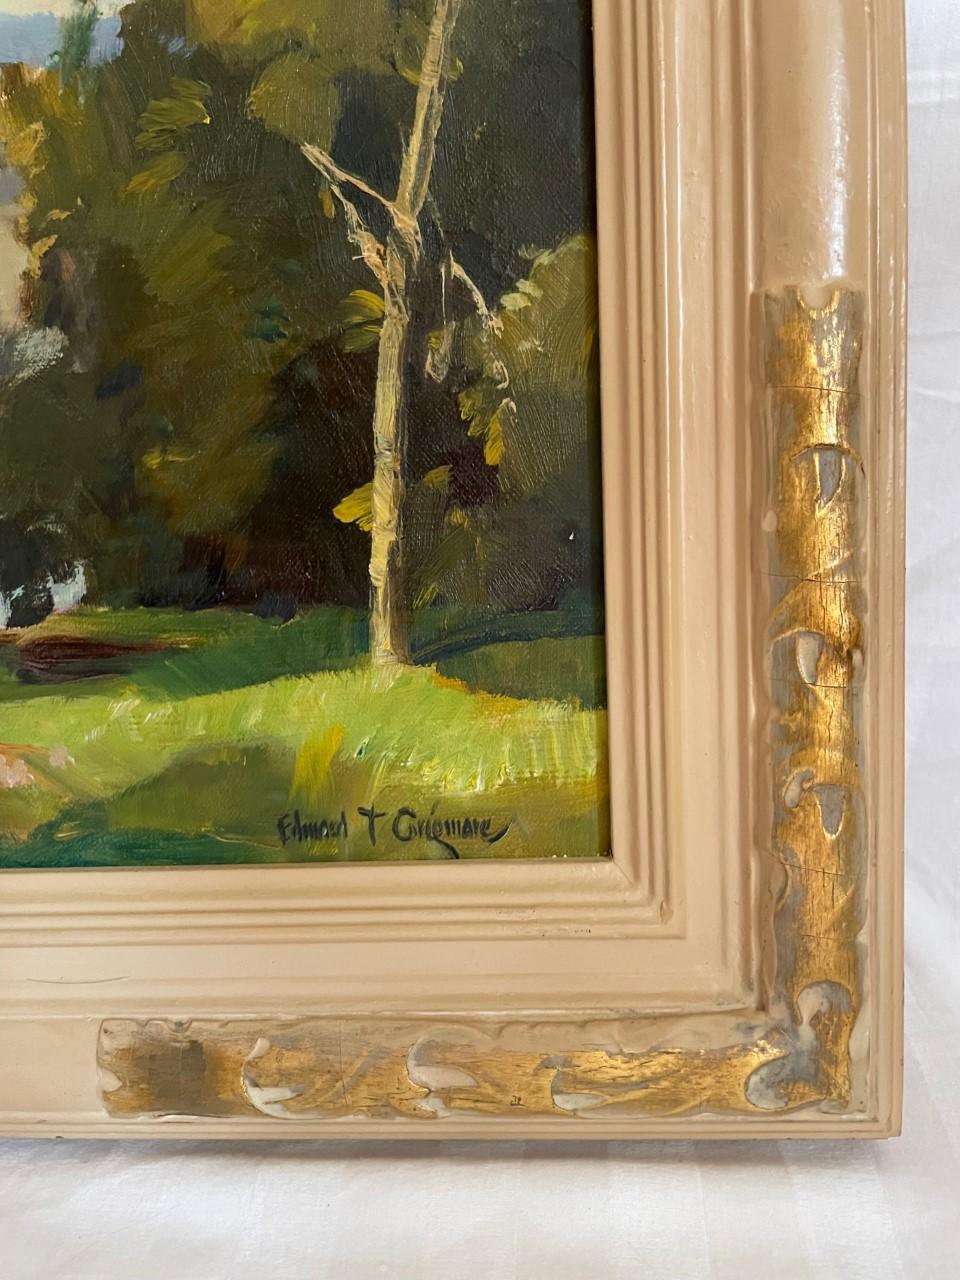 Hand-Painted American Impressionist Painting Signed E. T. Grigware, Newcomb Macklin Frame For Sale